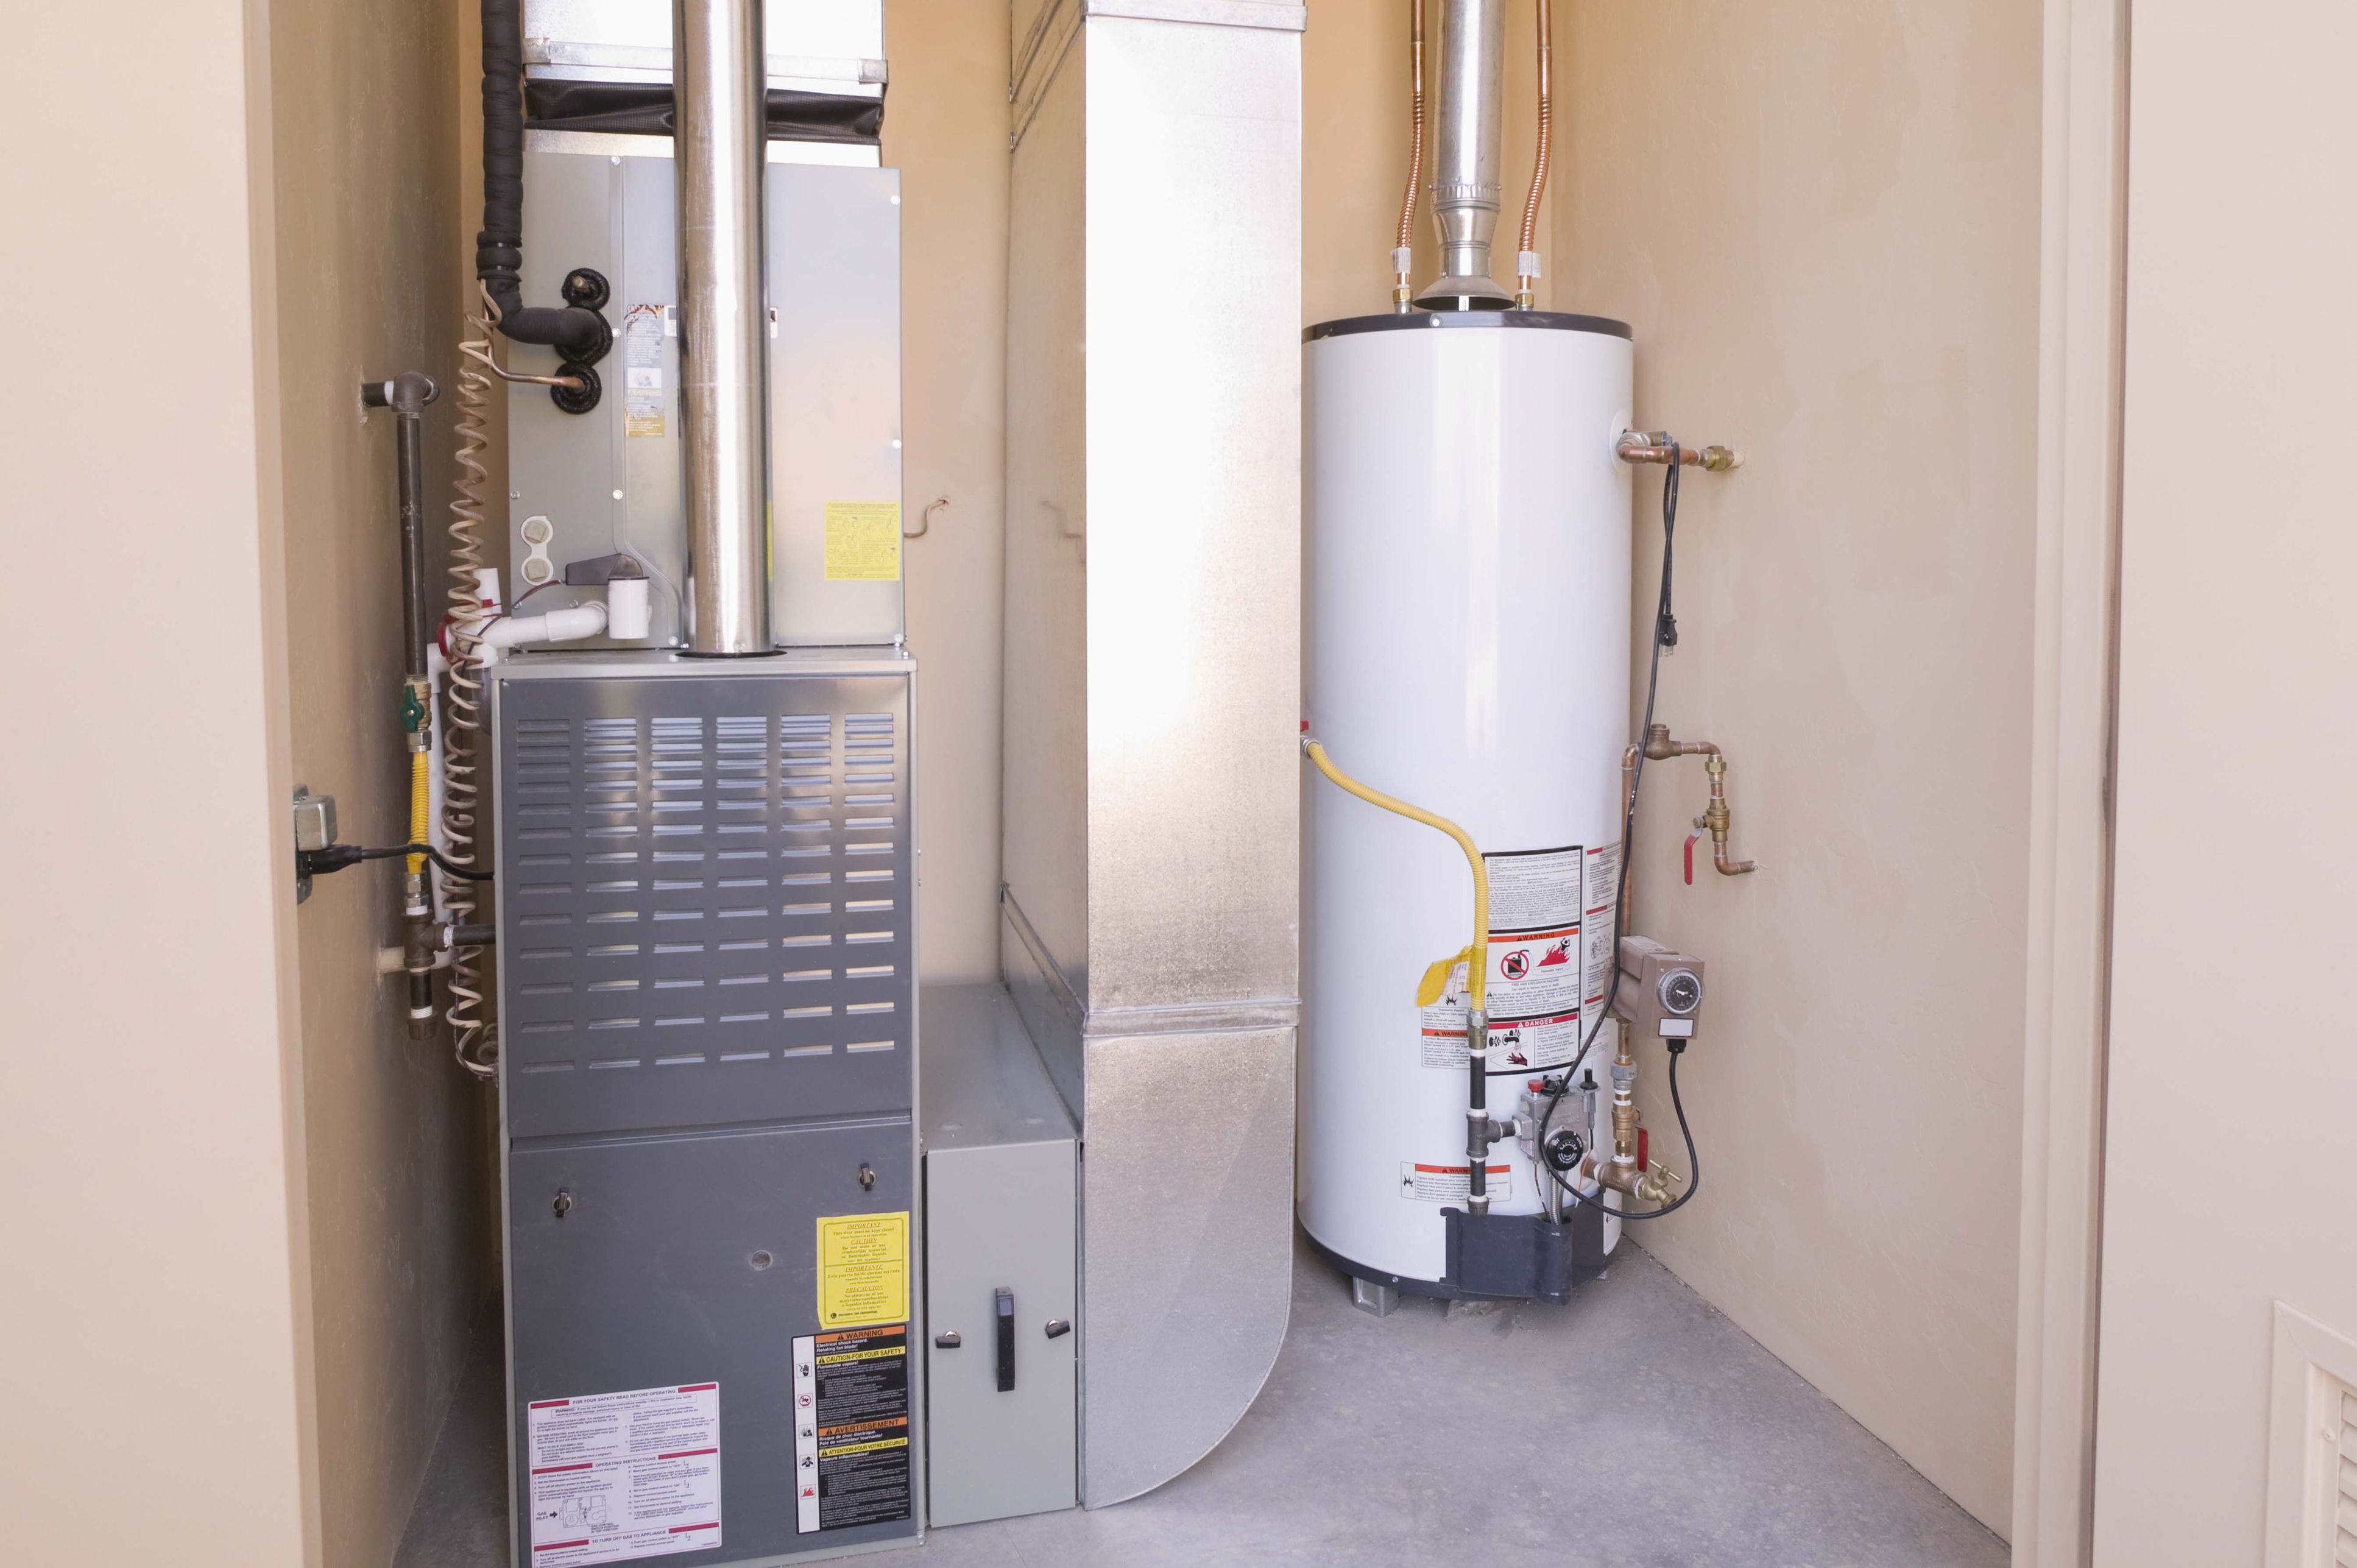 hot water heater and furnace in basement 580f79c75f9b ce0a260